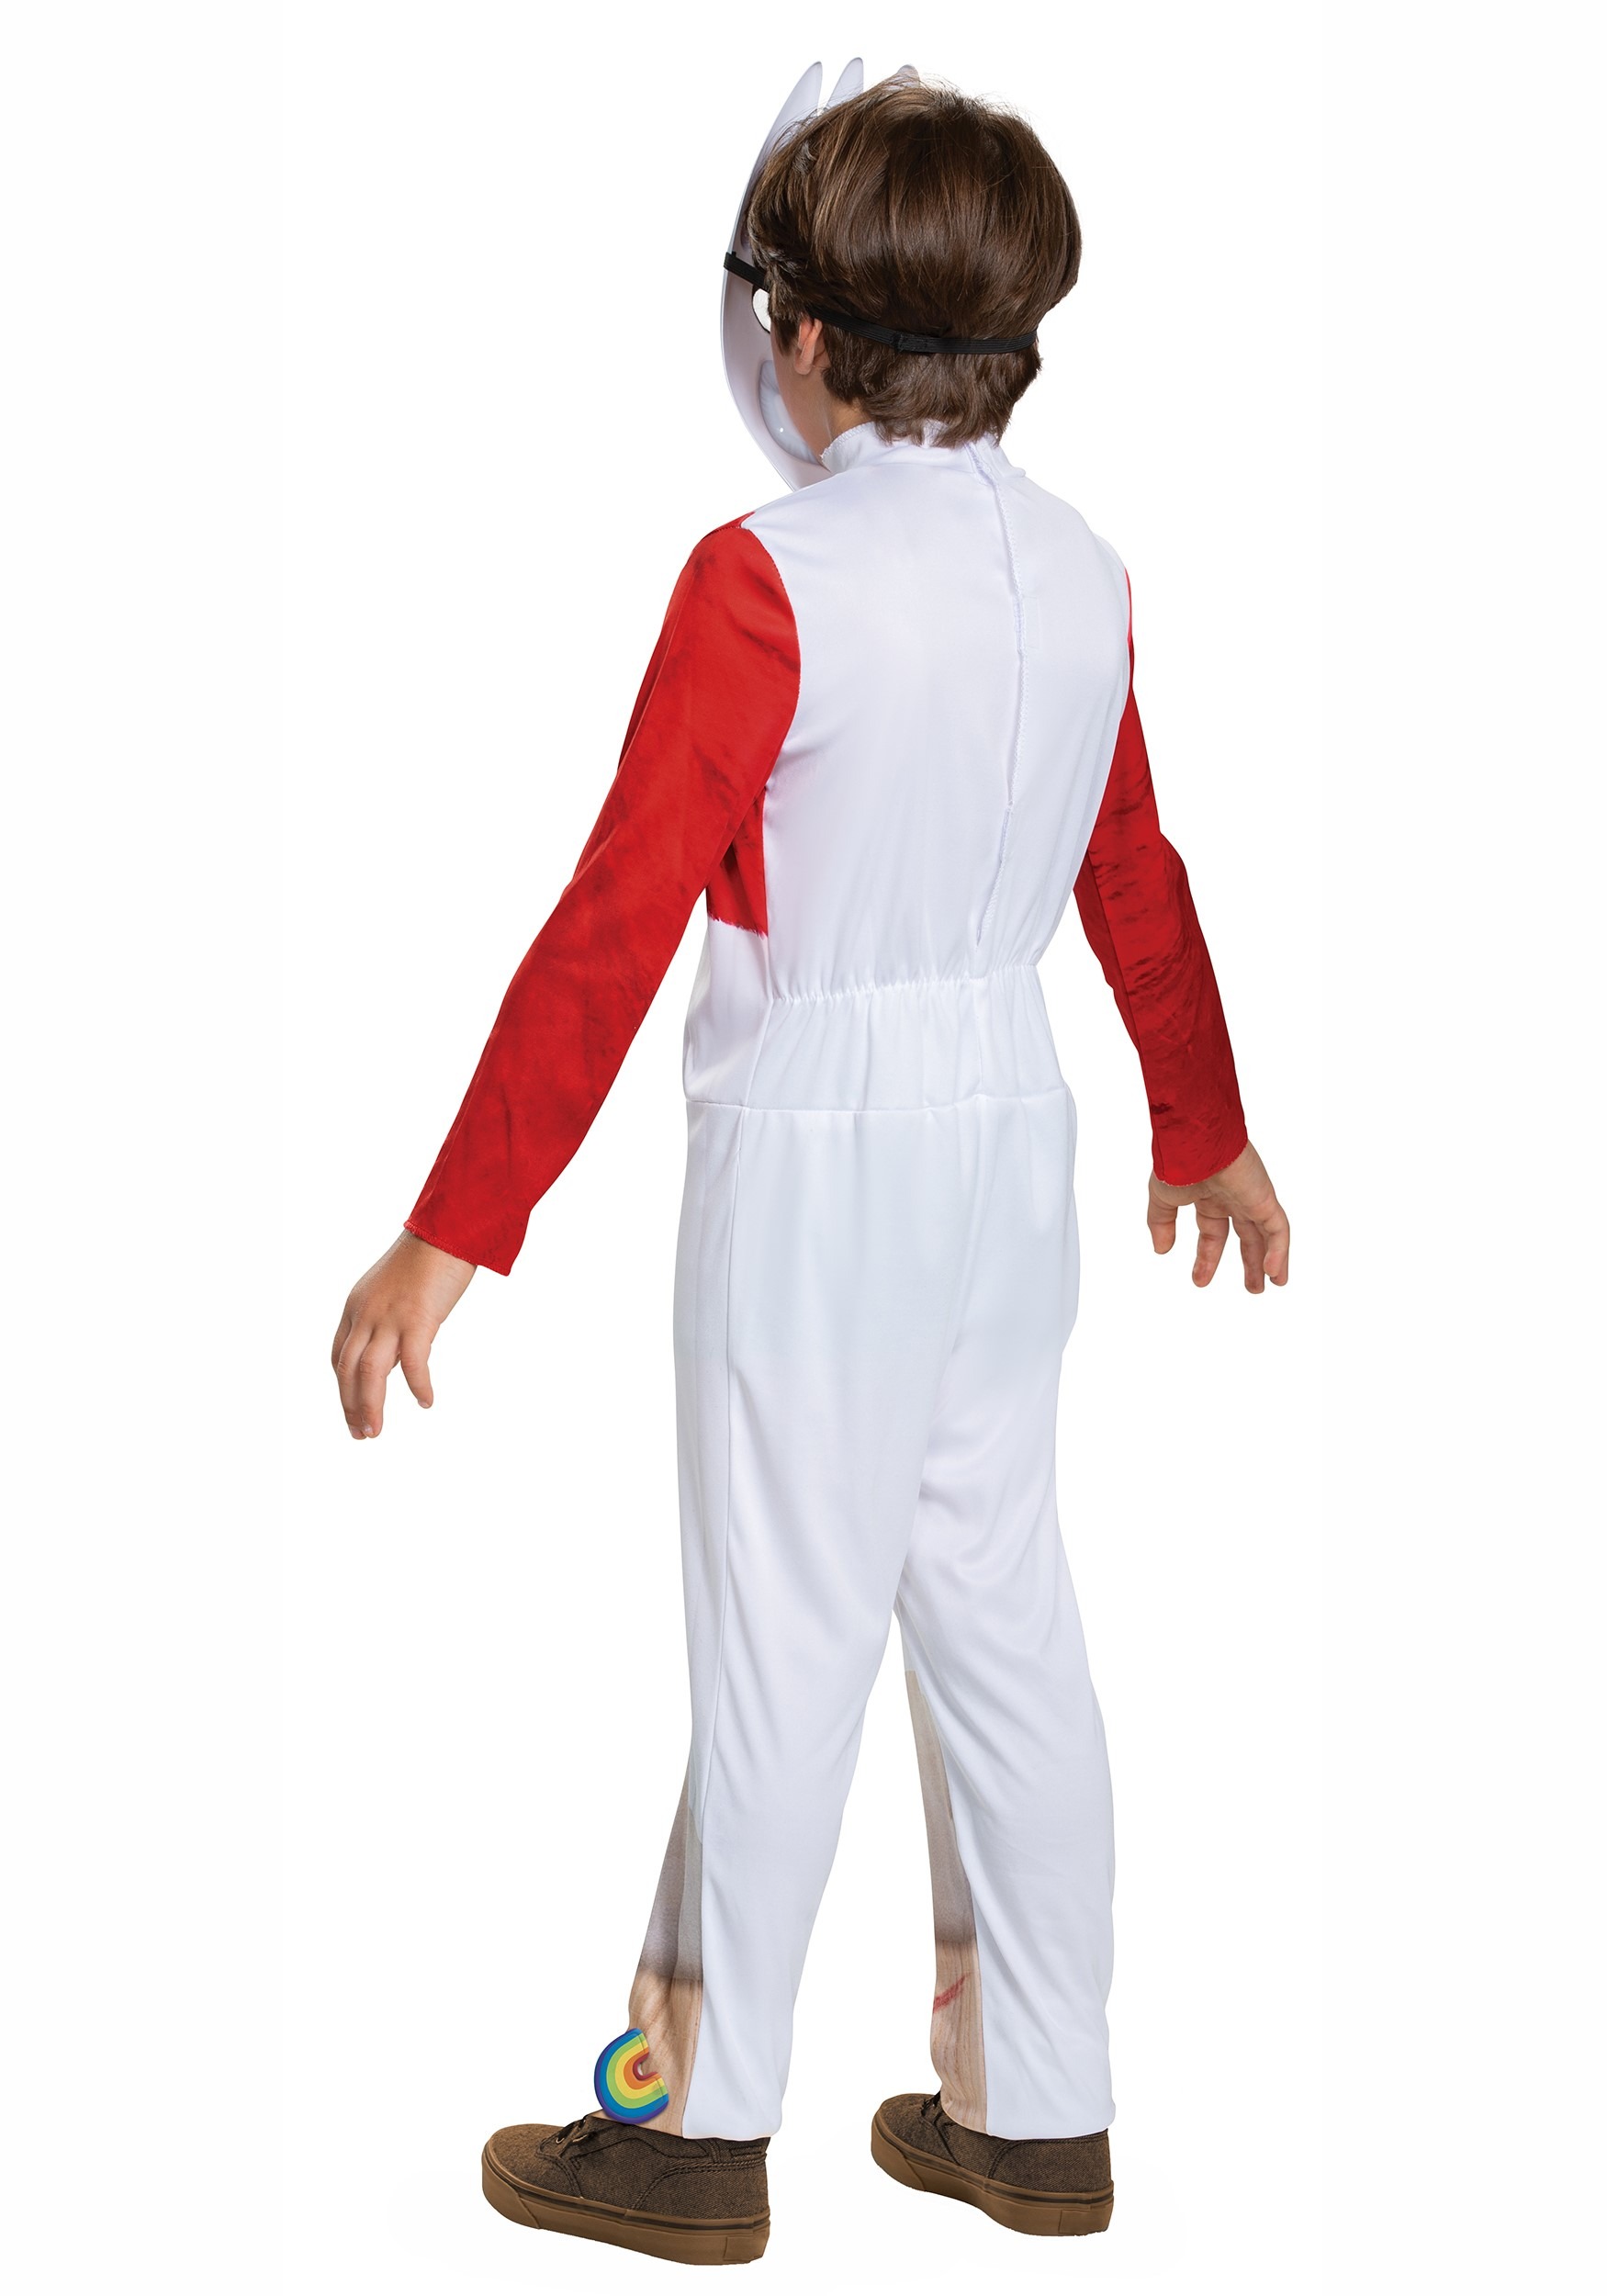 Details about   Toy Story 4 Forky Classic Halloween Costume Size XS 3T-4T 